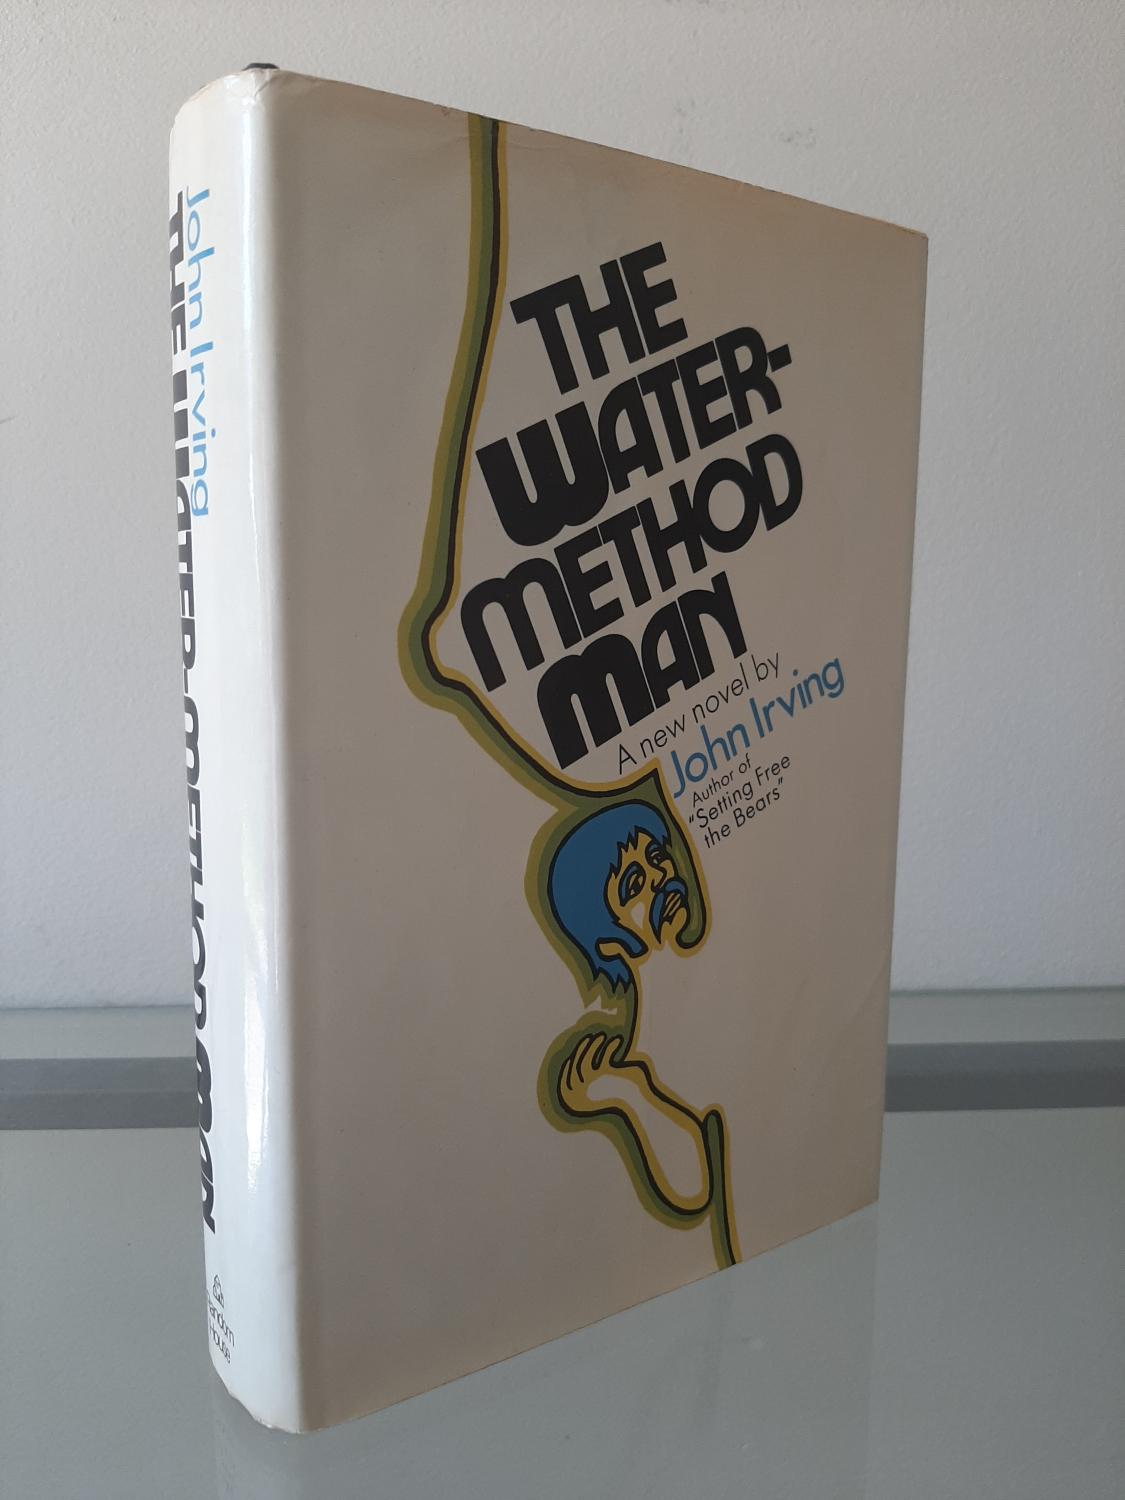 Water-Method Man by John Irving (Signed Copy)